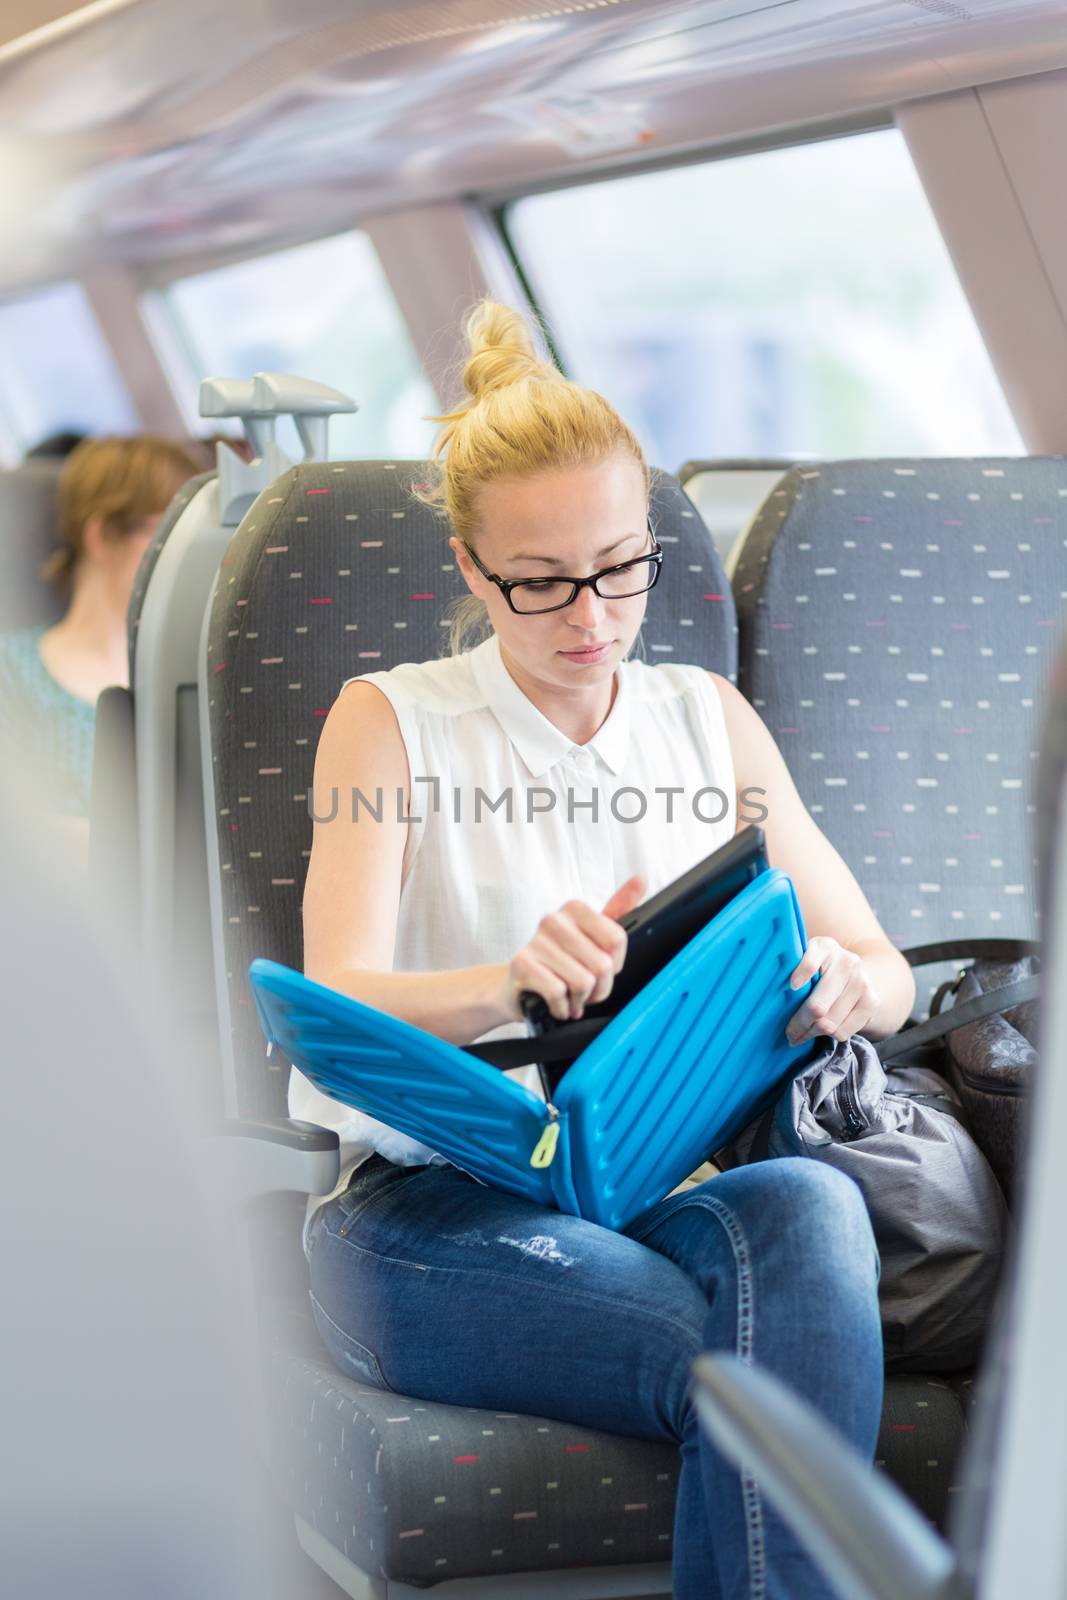 Woman travelling by train working on laptop. by kasto